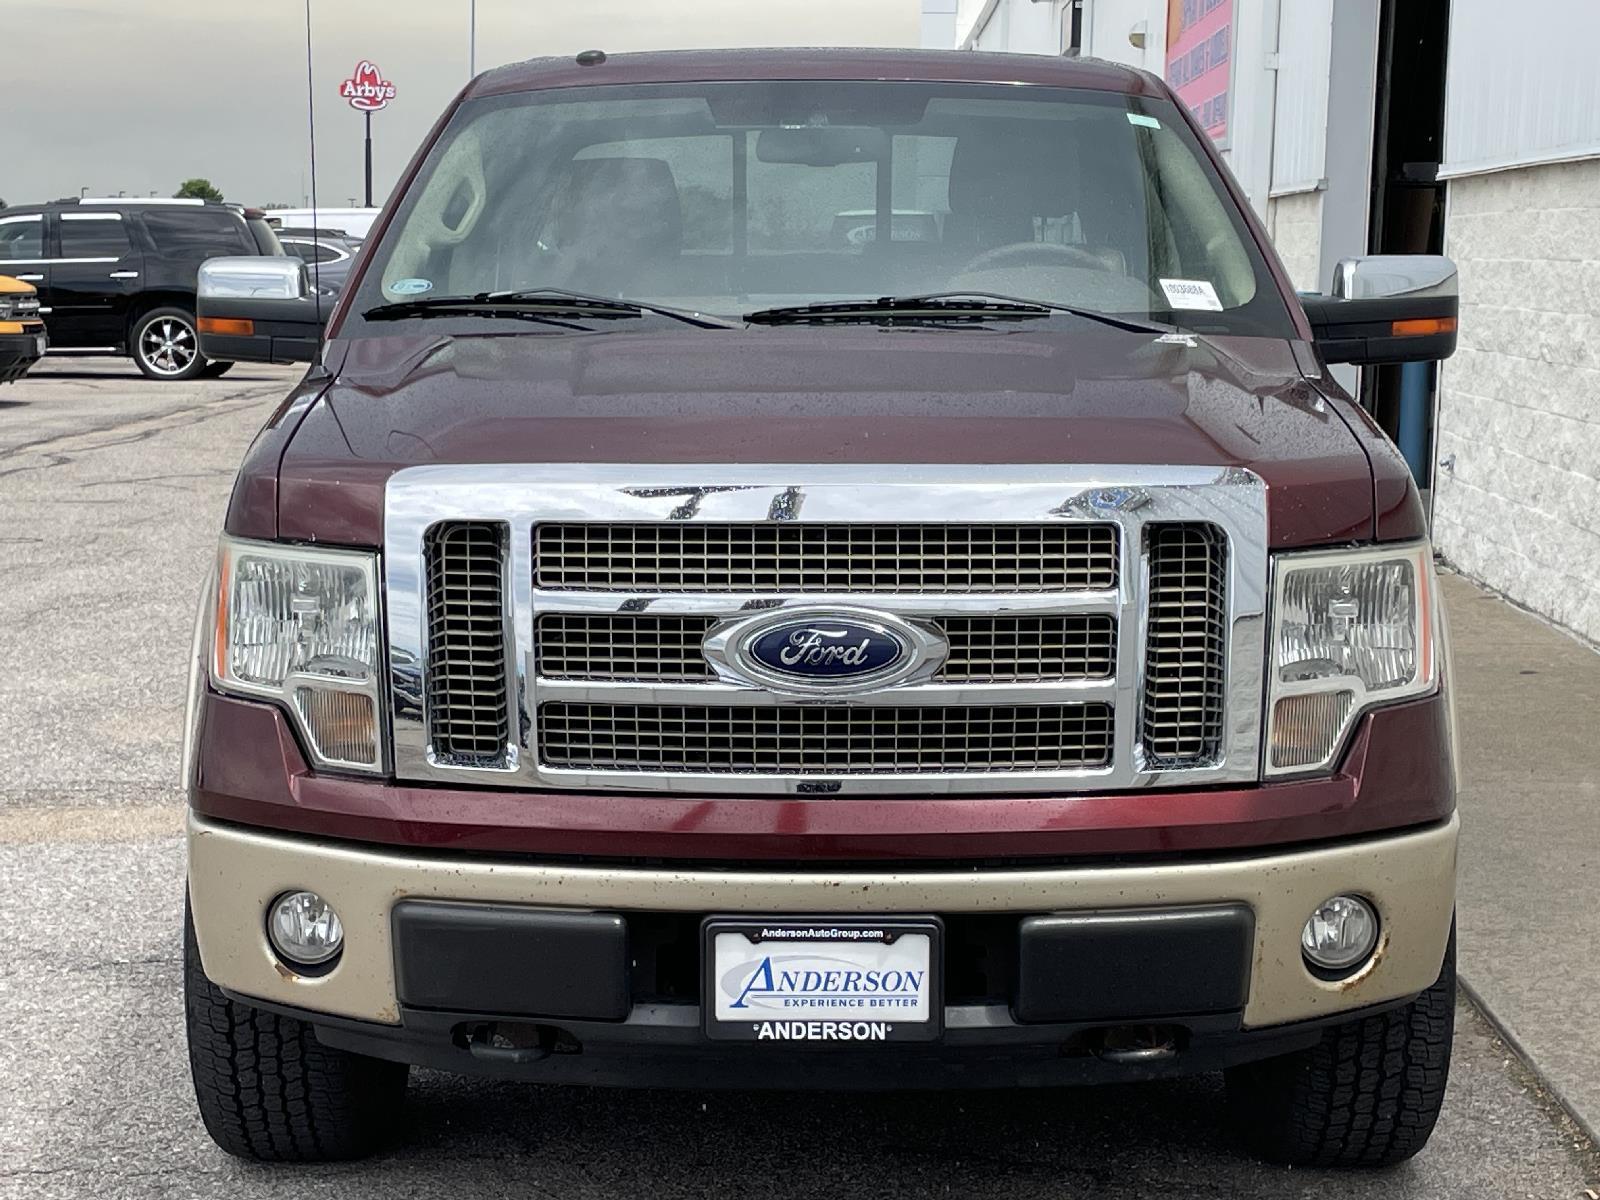 Used 2009 Ford F-150 King Ranch Crew Cab Truck for sale in Lincoln NE